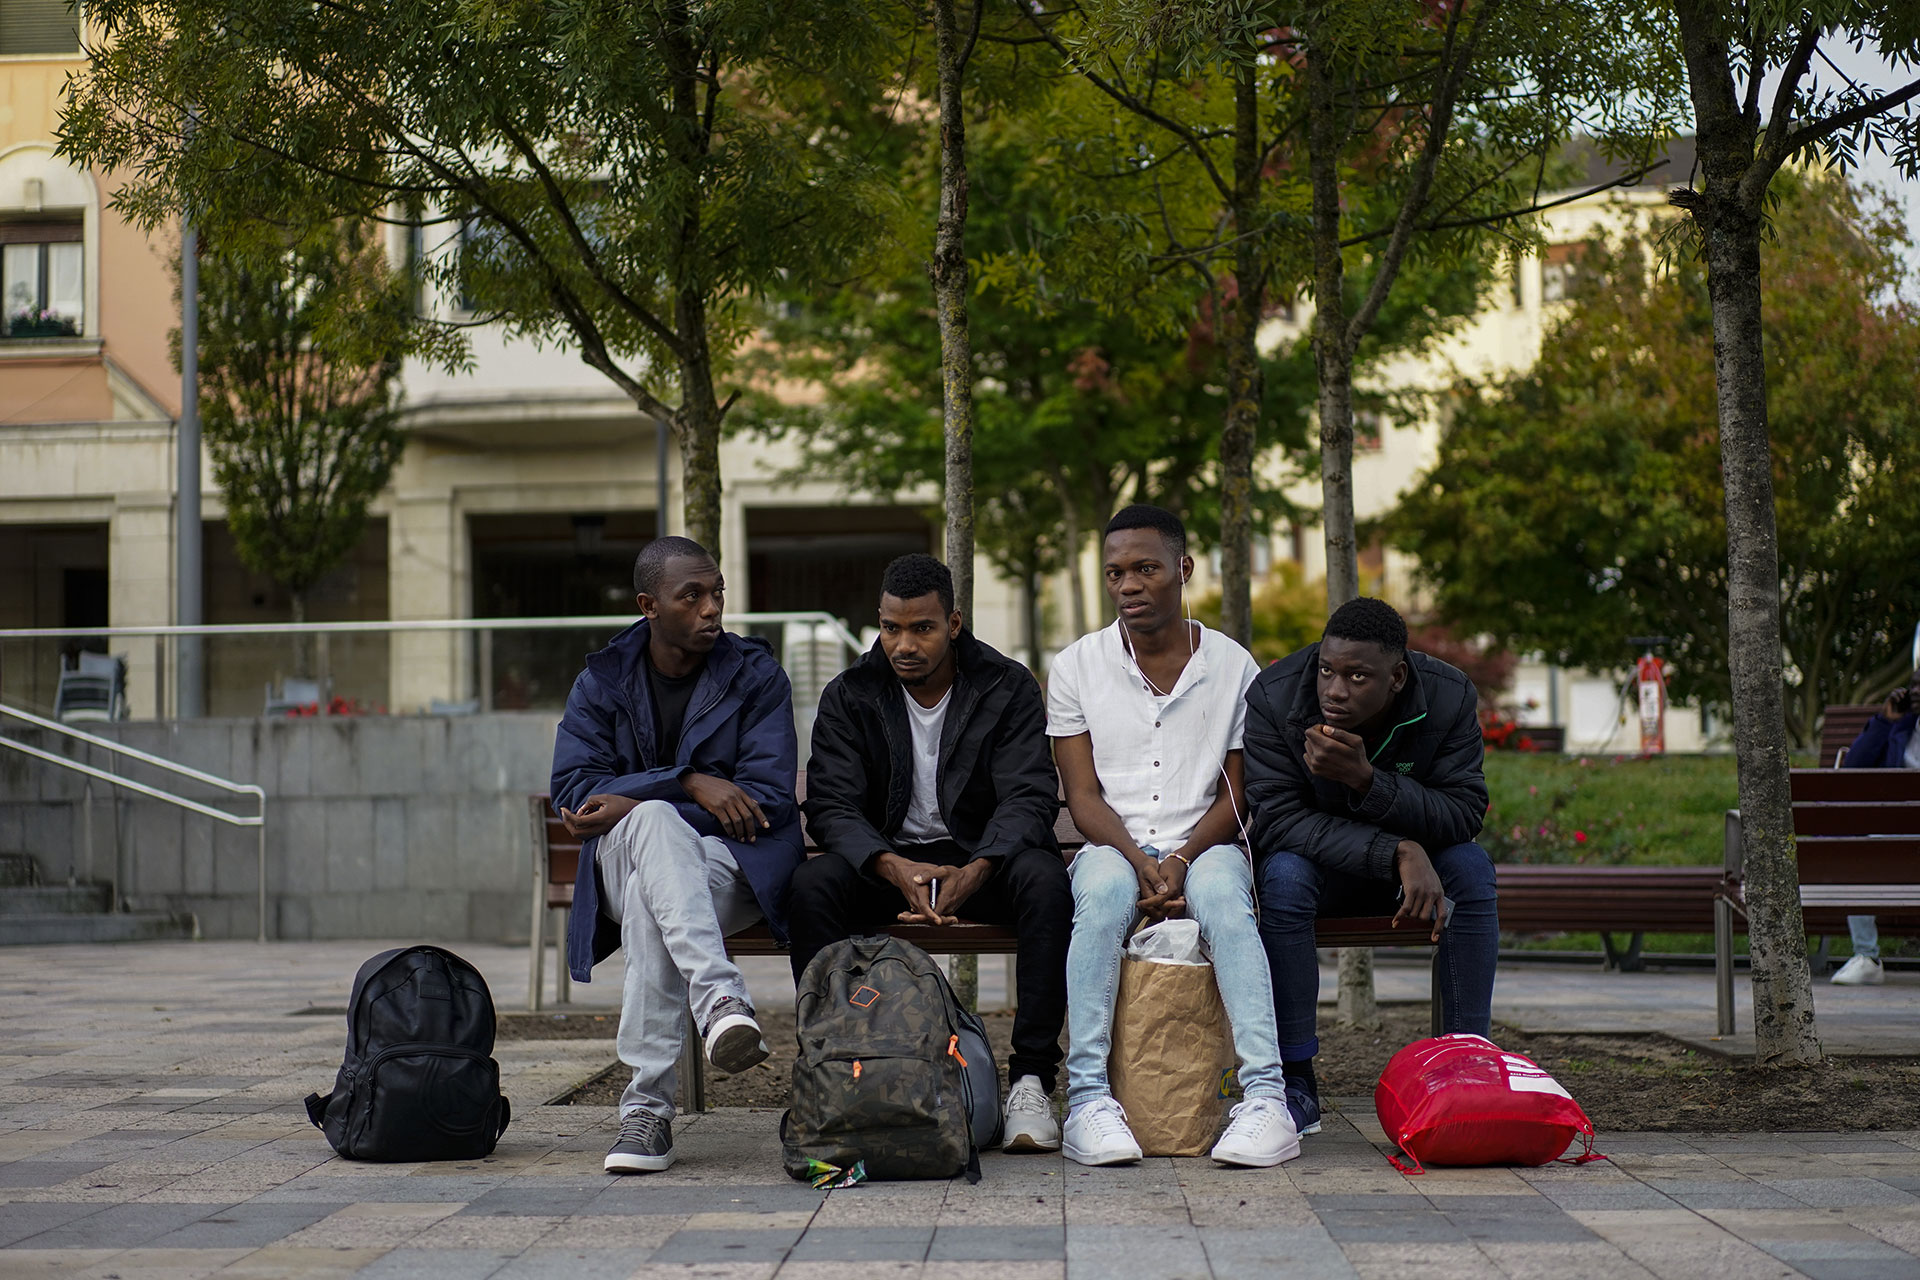 Ousmane waits with three companions in a square in Irun minutes before taking a bus to try to cross to France, September 17, 2019.